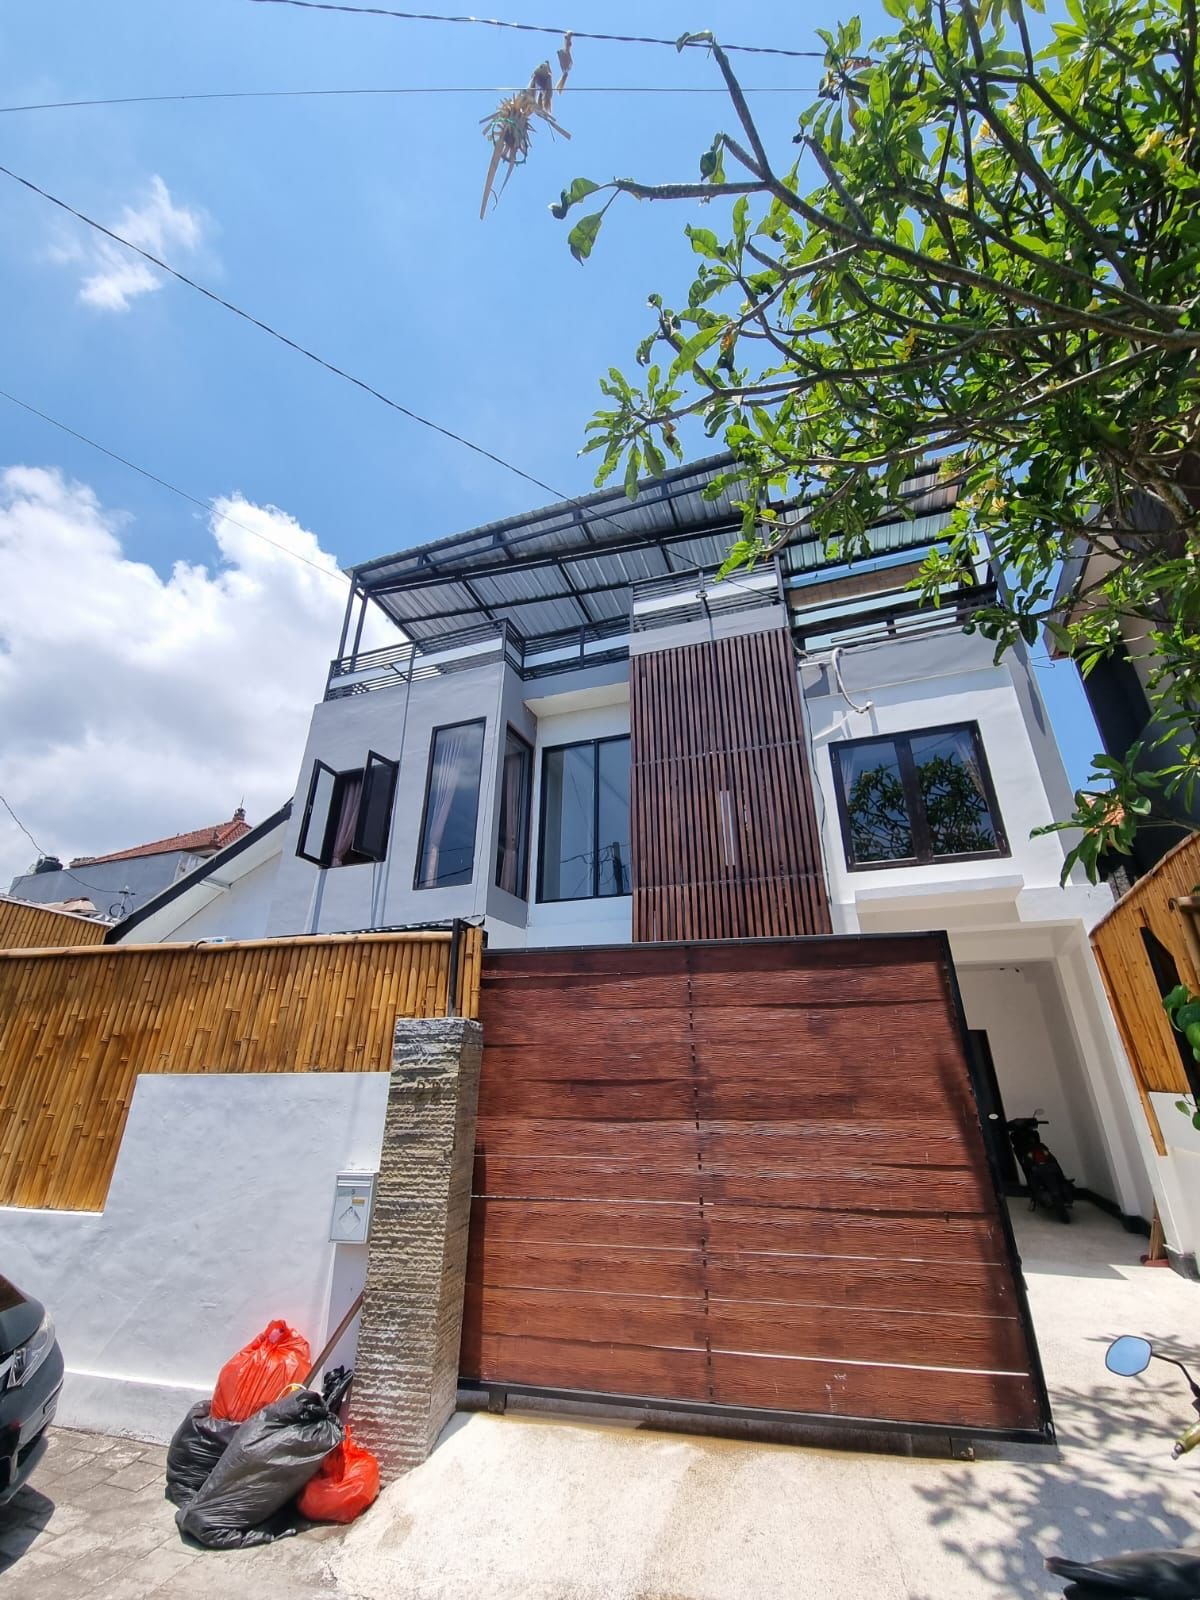 Nearly New Three-Story Villa with Pool and Rooftop Terrace in Kuta Seminyak